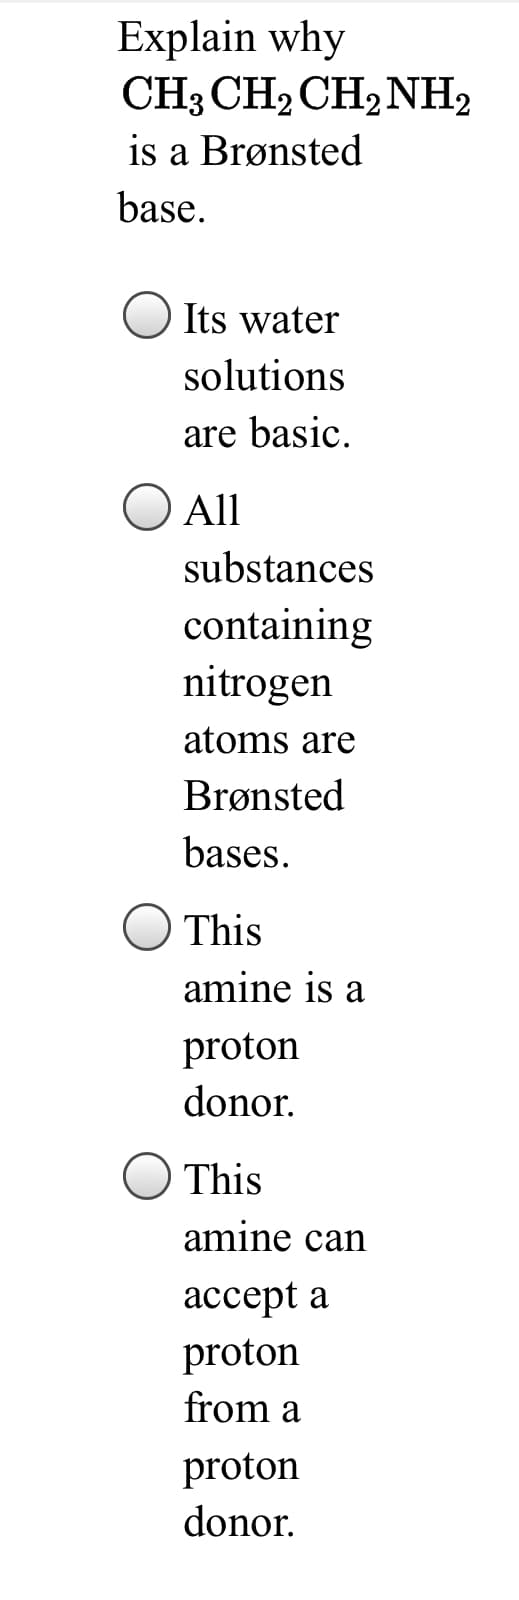 Explain why
CH3 CH2 CH2NH2
is a Brønsted
base.
Its water
solutions
are basic.
All
substances
containing
nitrogen
atoms are
Brønsted
bases.
This
amine is a
proton
donor.
This
amine can
ассеpt a
proton
from a
proton
donor.
